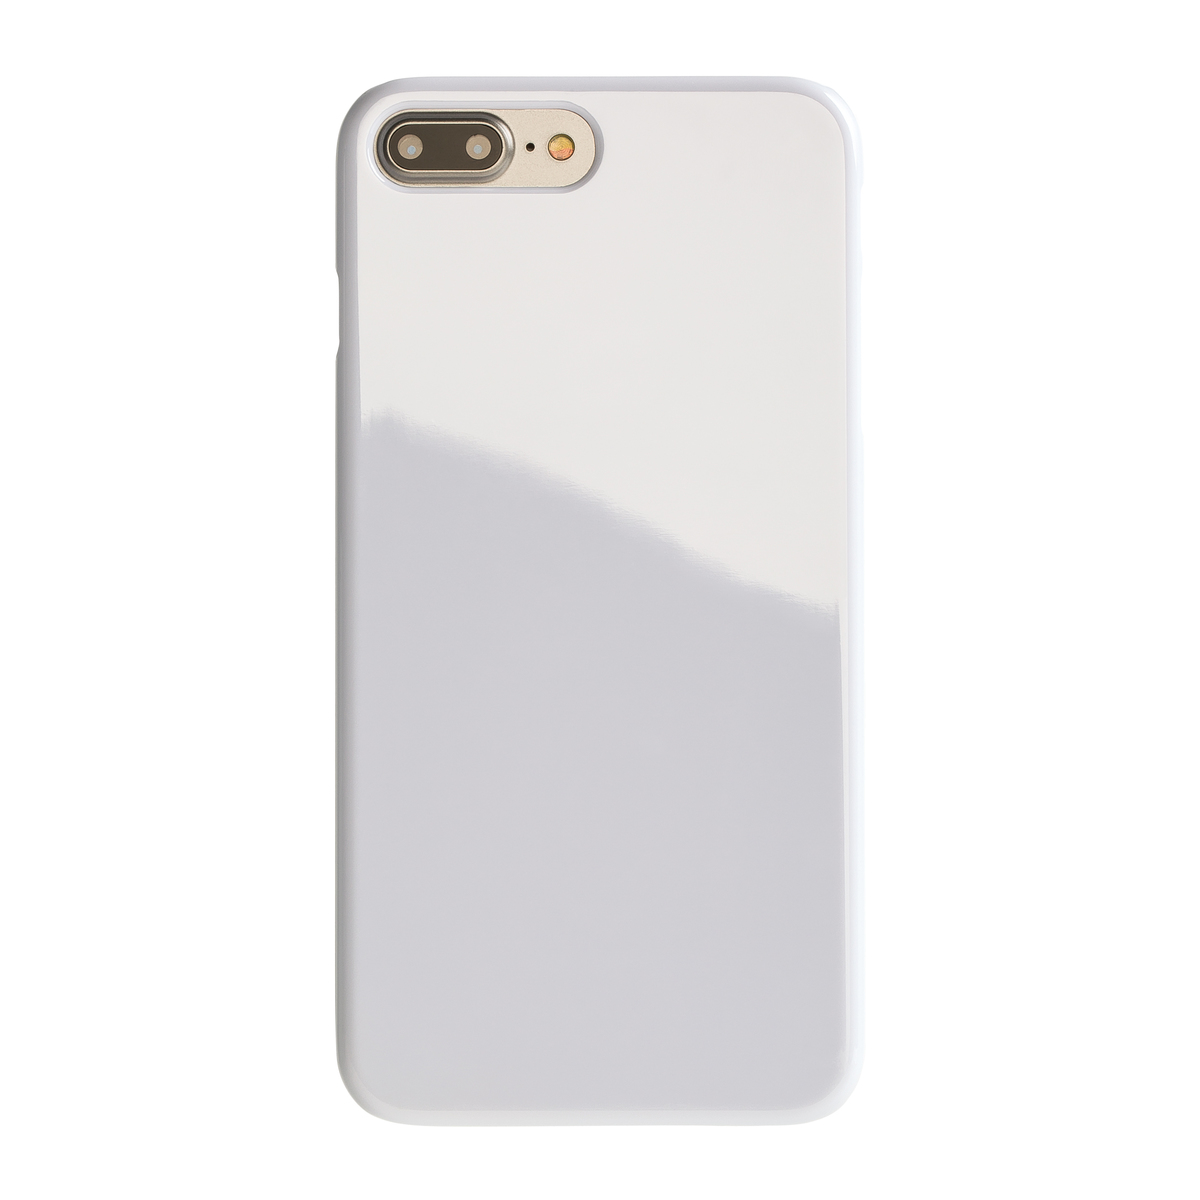 LM Smartphonecover REFLECTS-COVER XII IPhone 7 Plus WHITE weiß